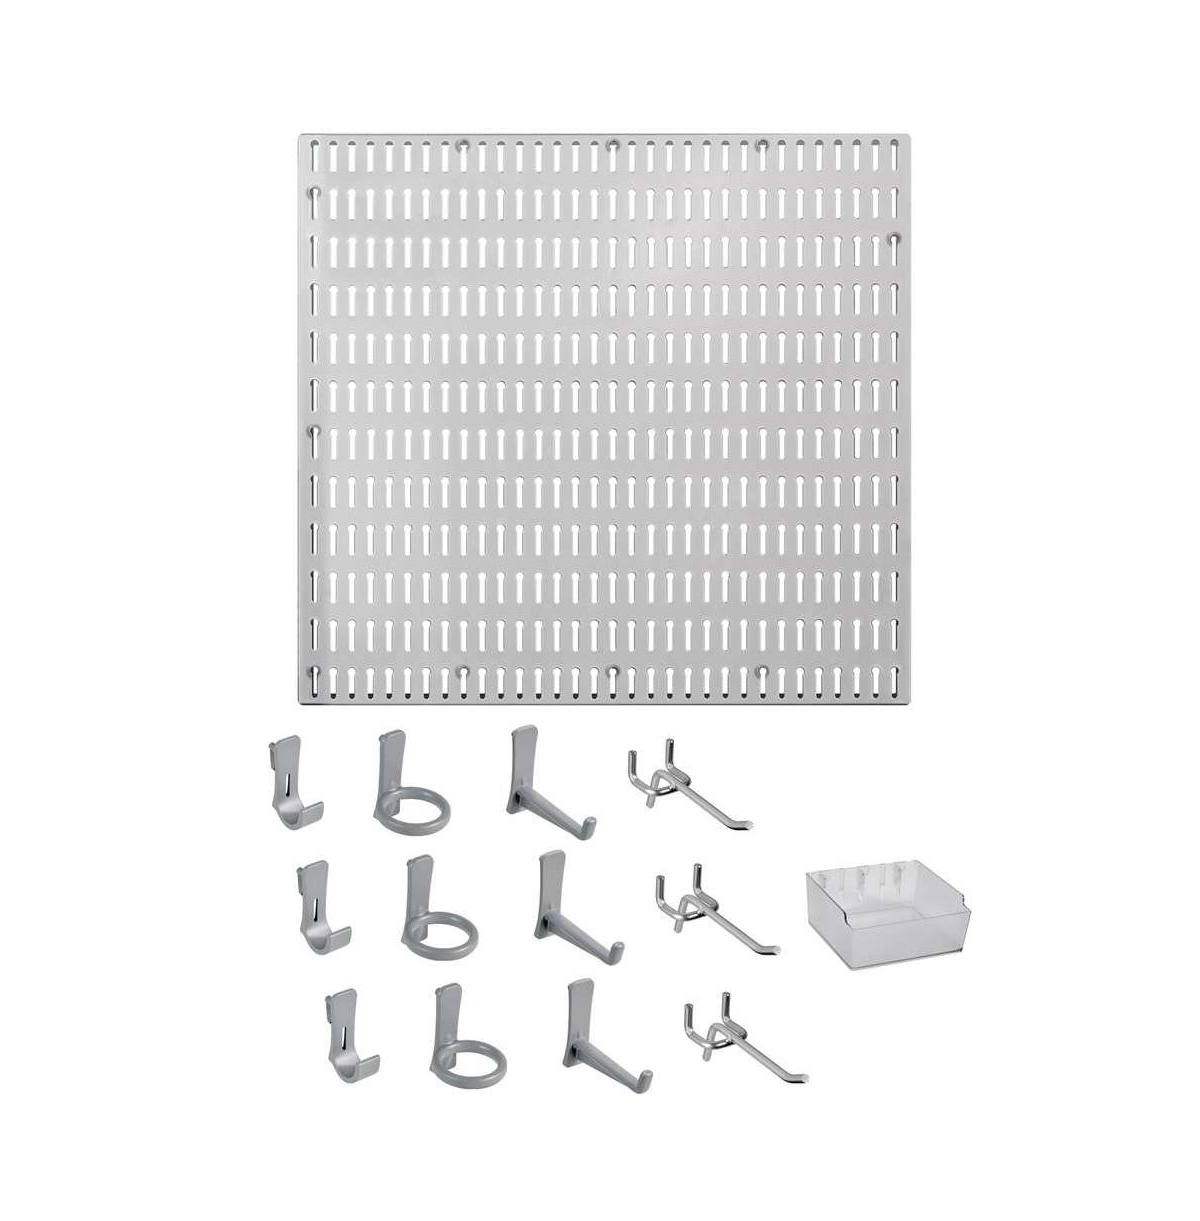 14 Piece Garage Organizer Wall Storage System with Pegboard, Hooks and Hangers - Grey